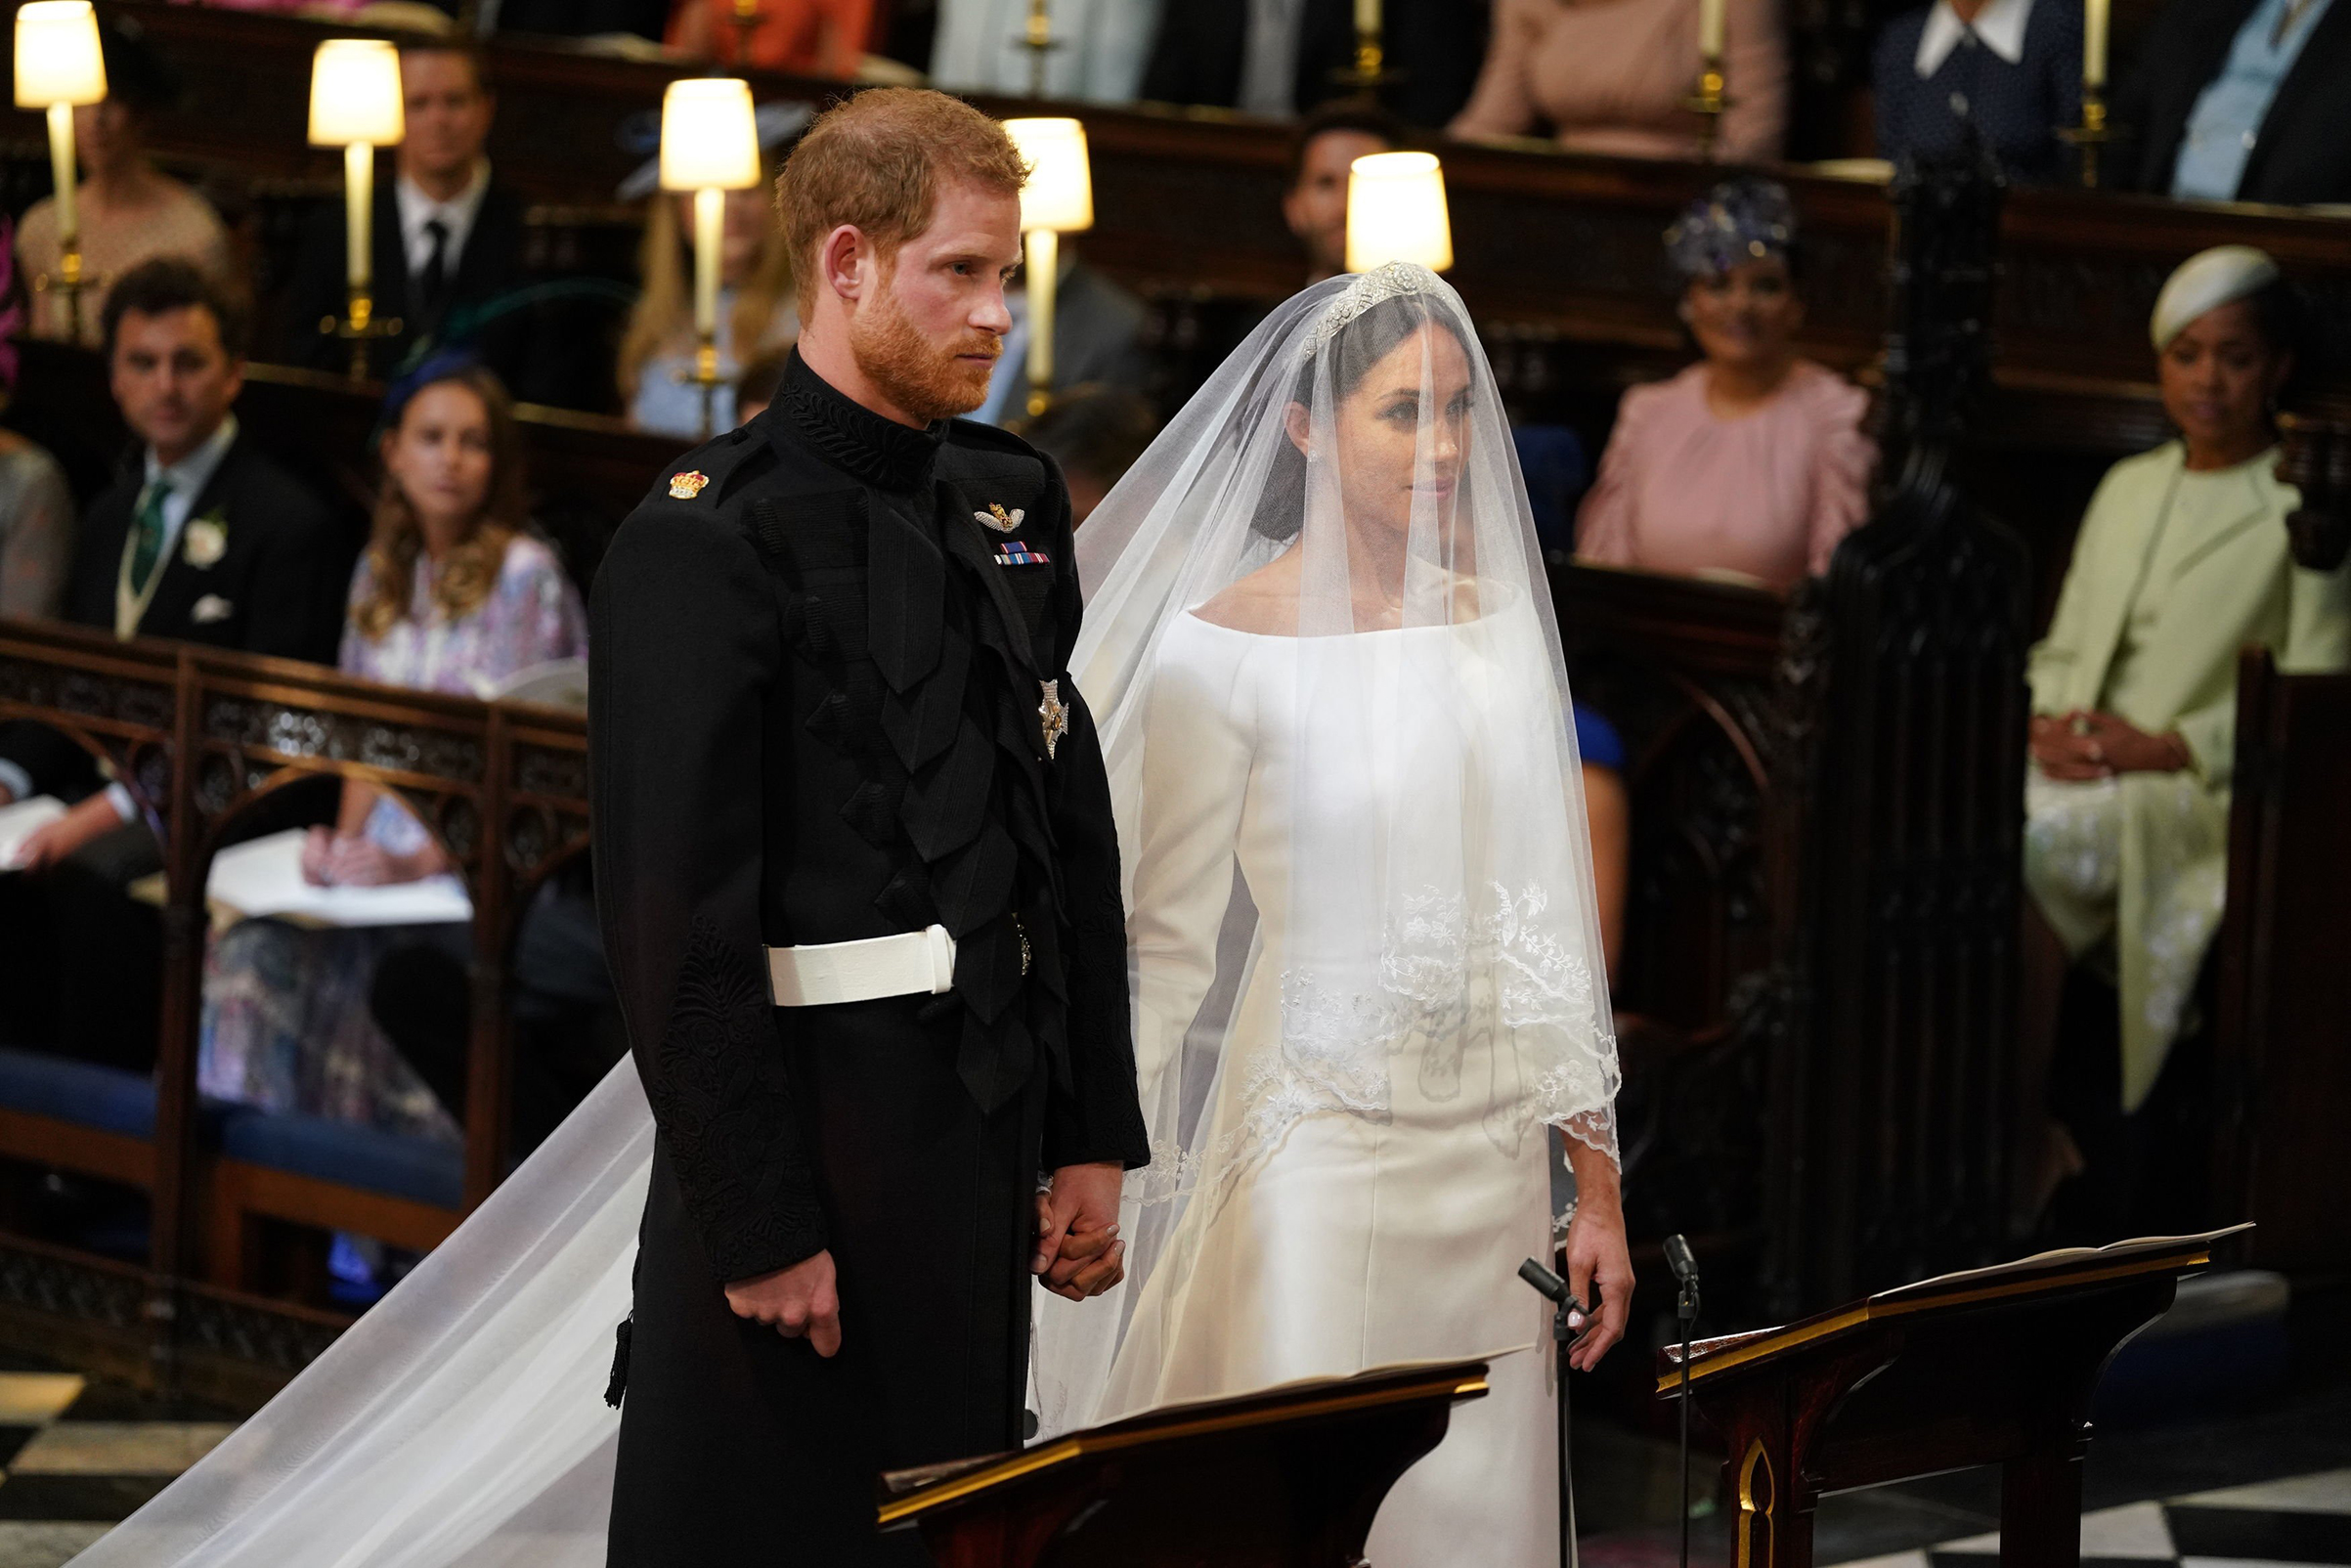 Prince Harry and Meghan Markle in St George's Chapel at Windsor Castle for their wedding, May 19, 2018. (Dominic Lipinski—PA Wire)